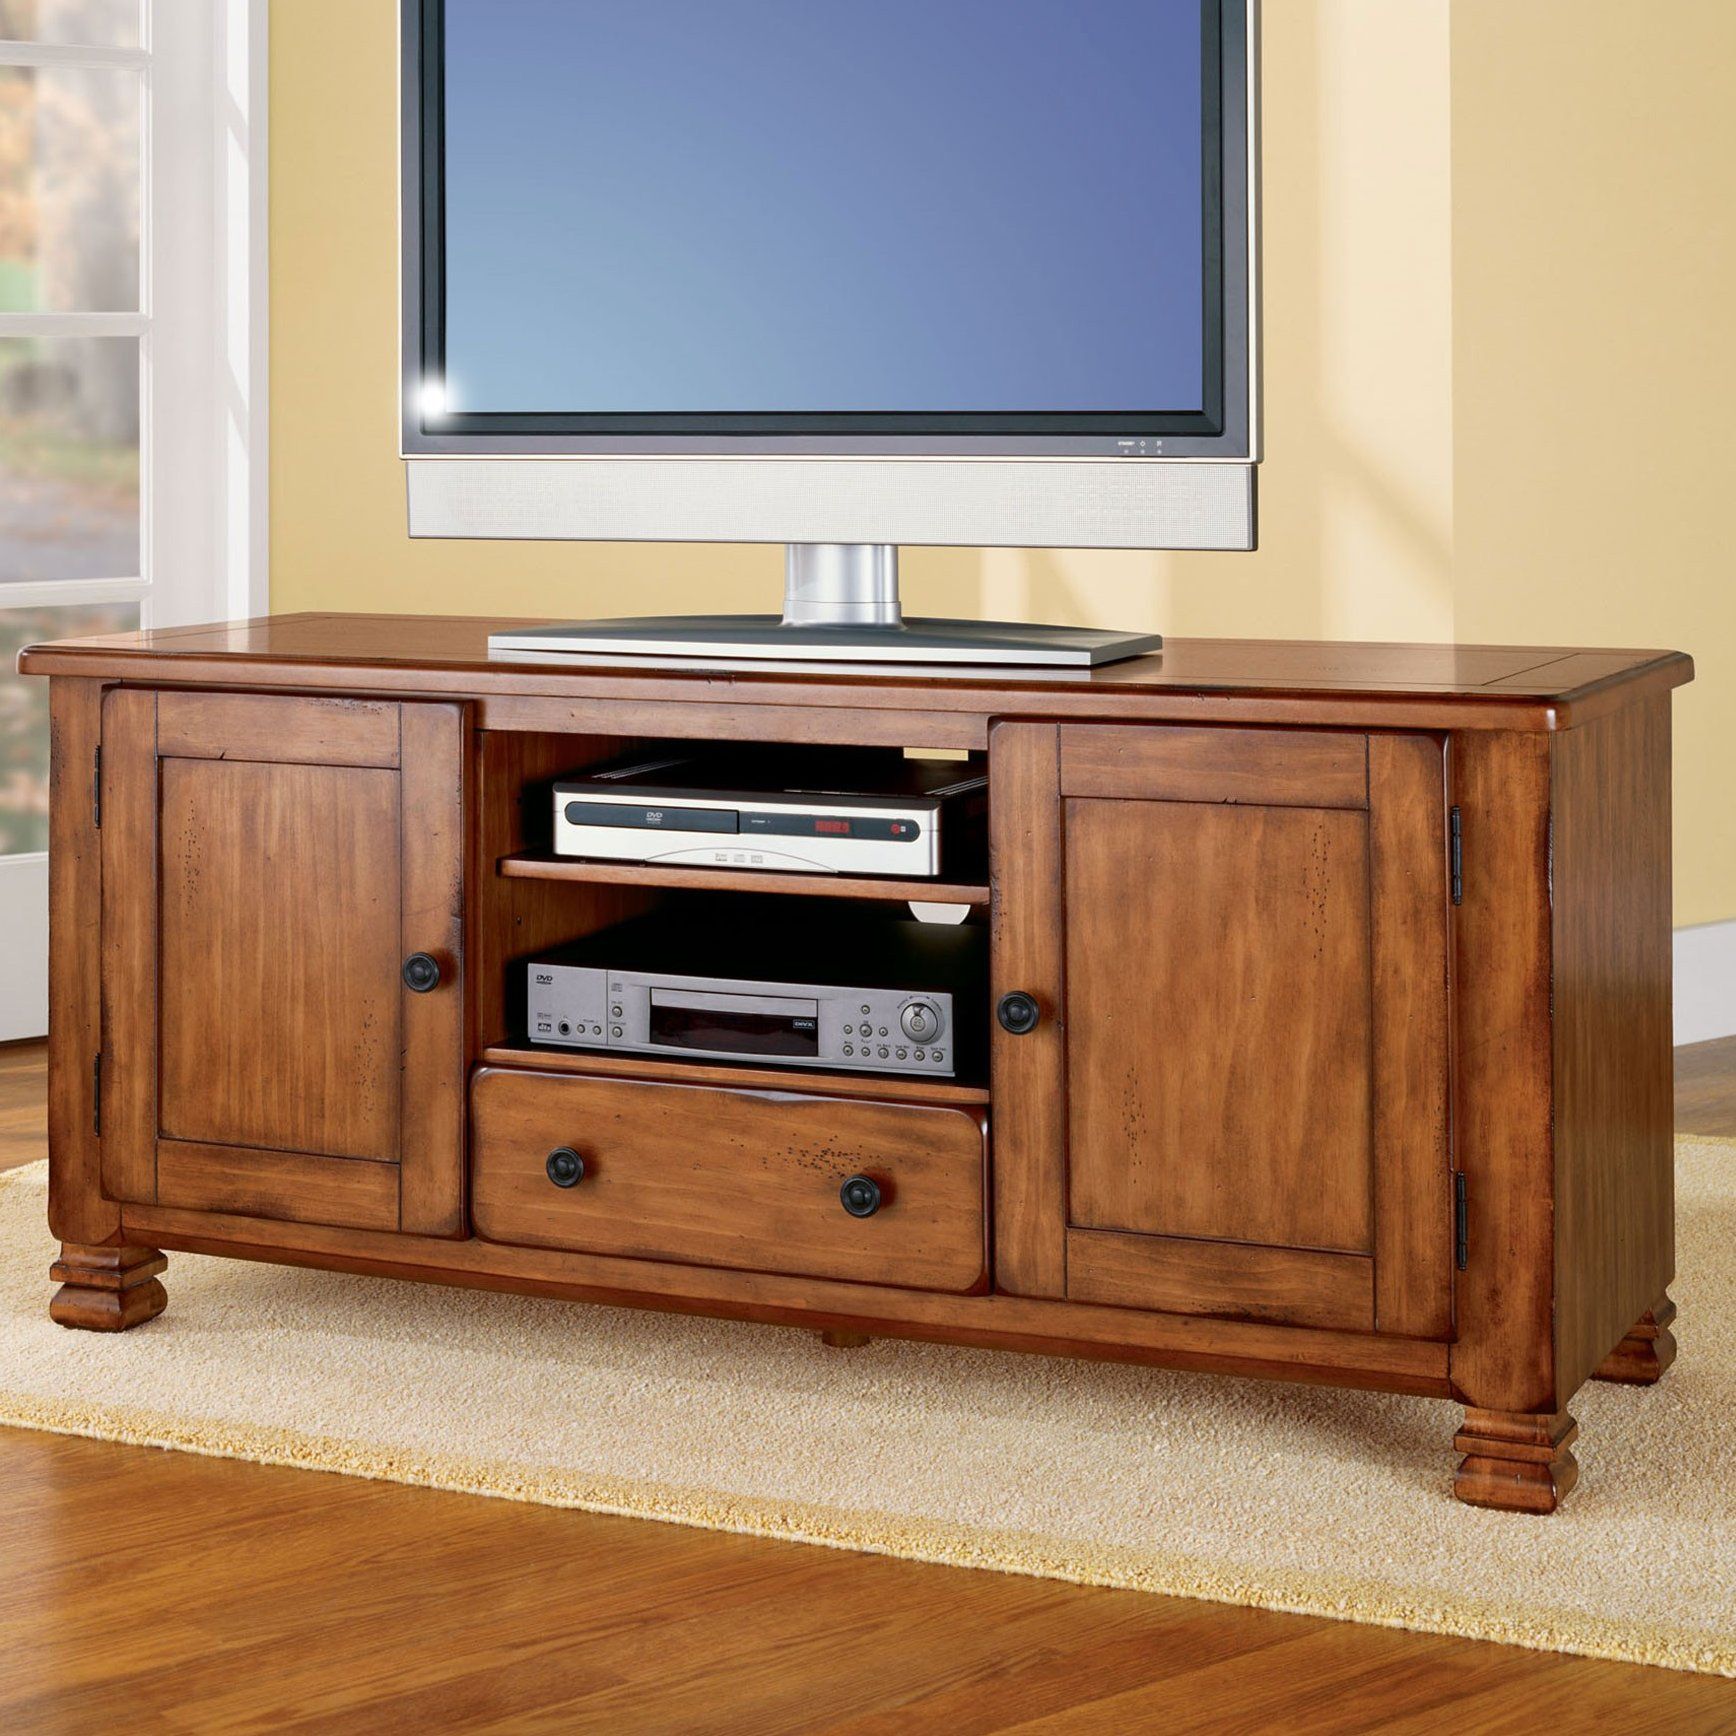 Alcott Hill Brackenridge Tv Stand For Tvs Up To 55" & Reviews | Wayfair Inside Laurent 60 Inch Tv Stands (View 28 of 30)